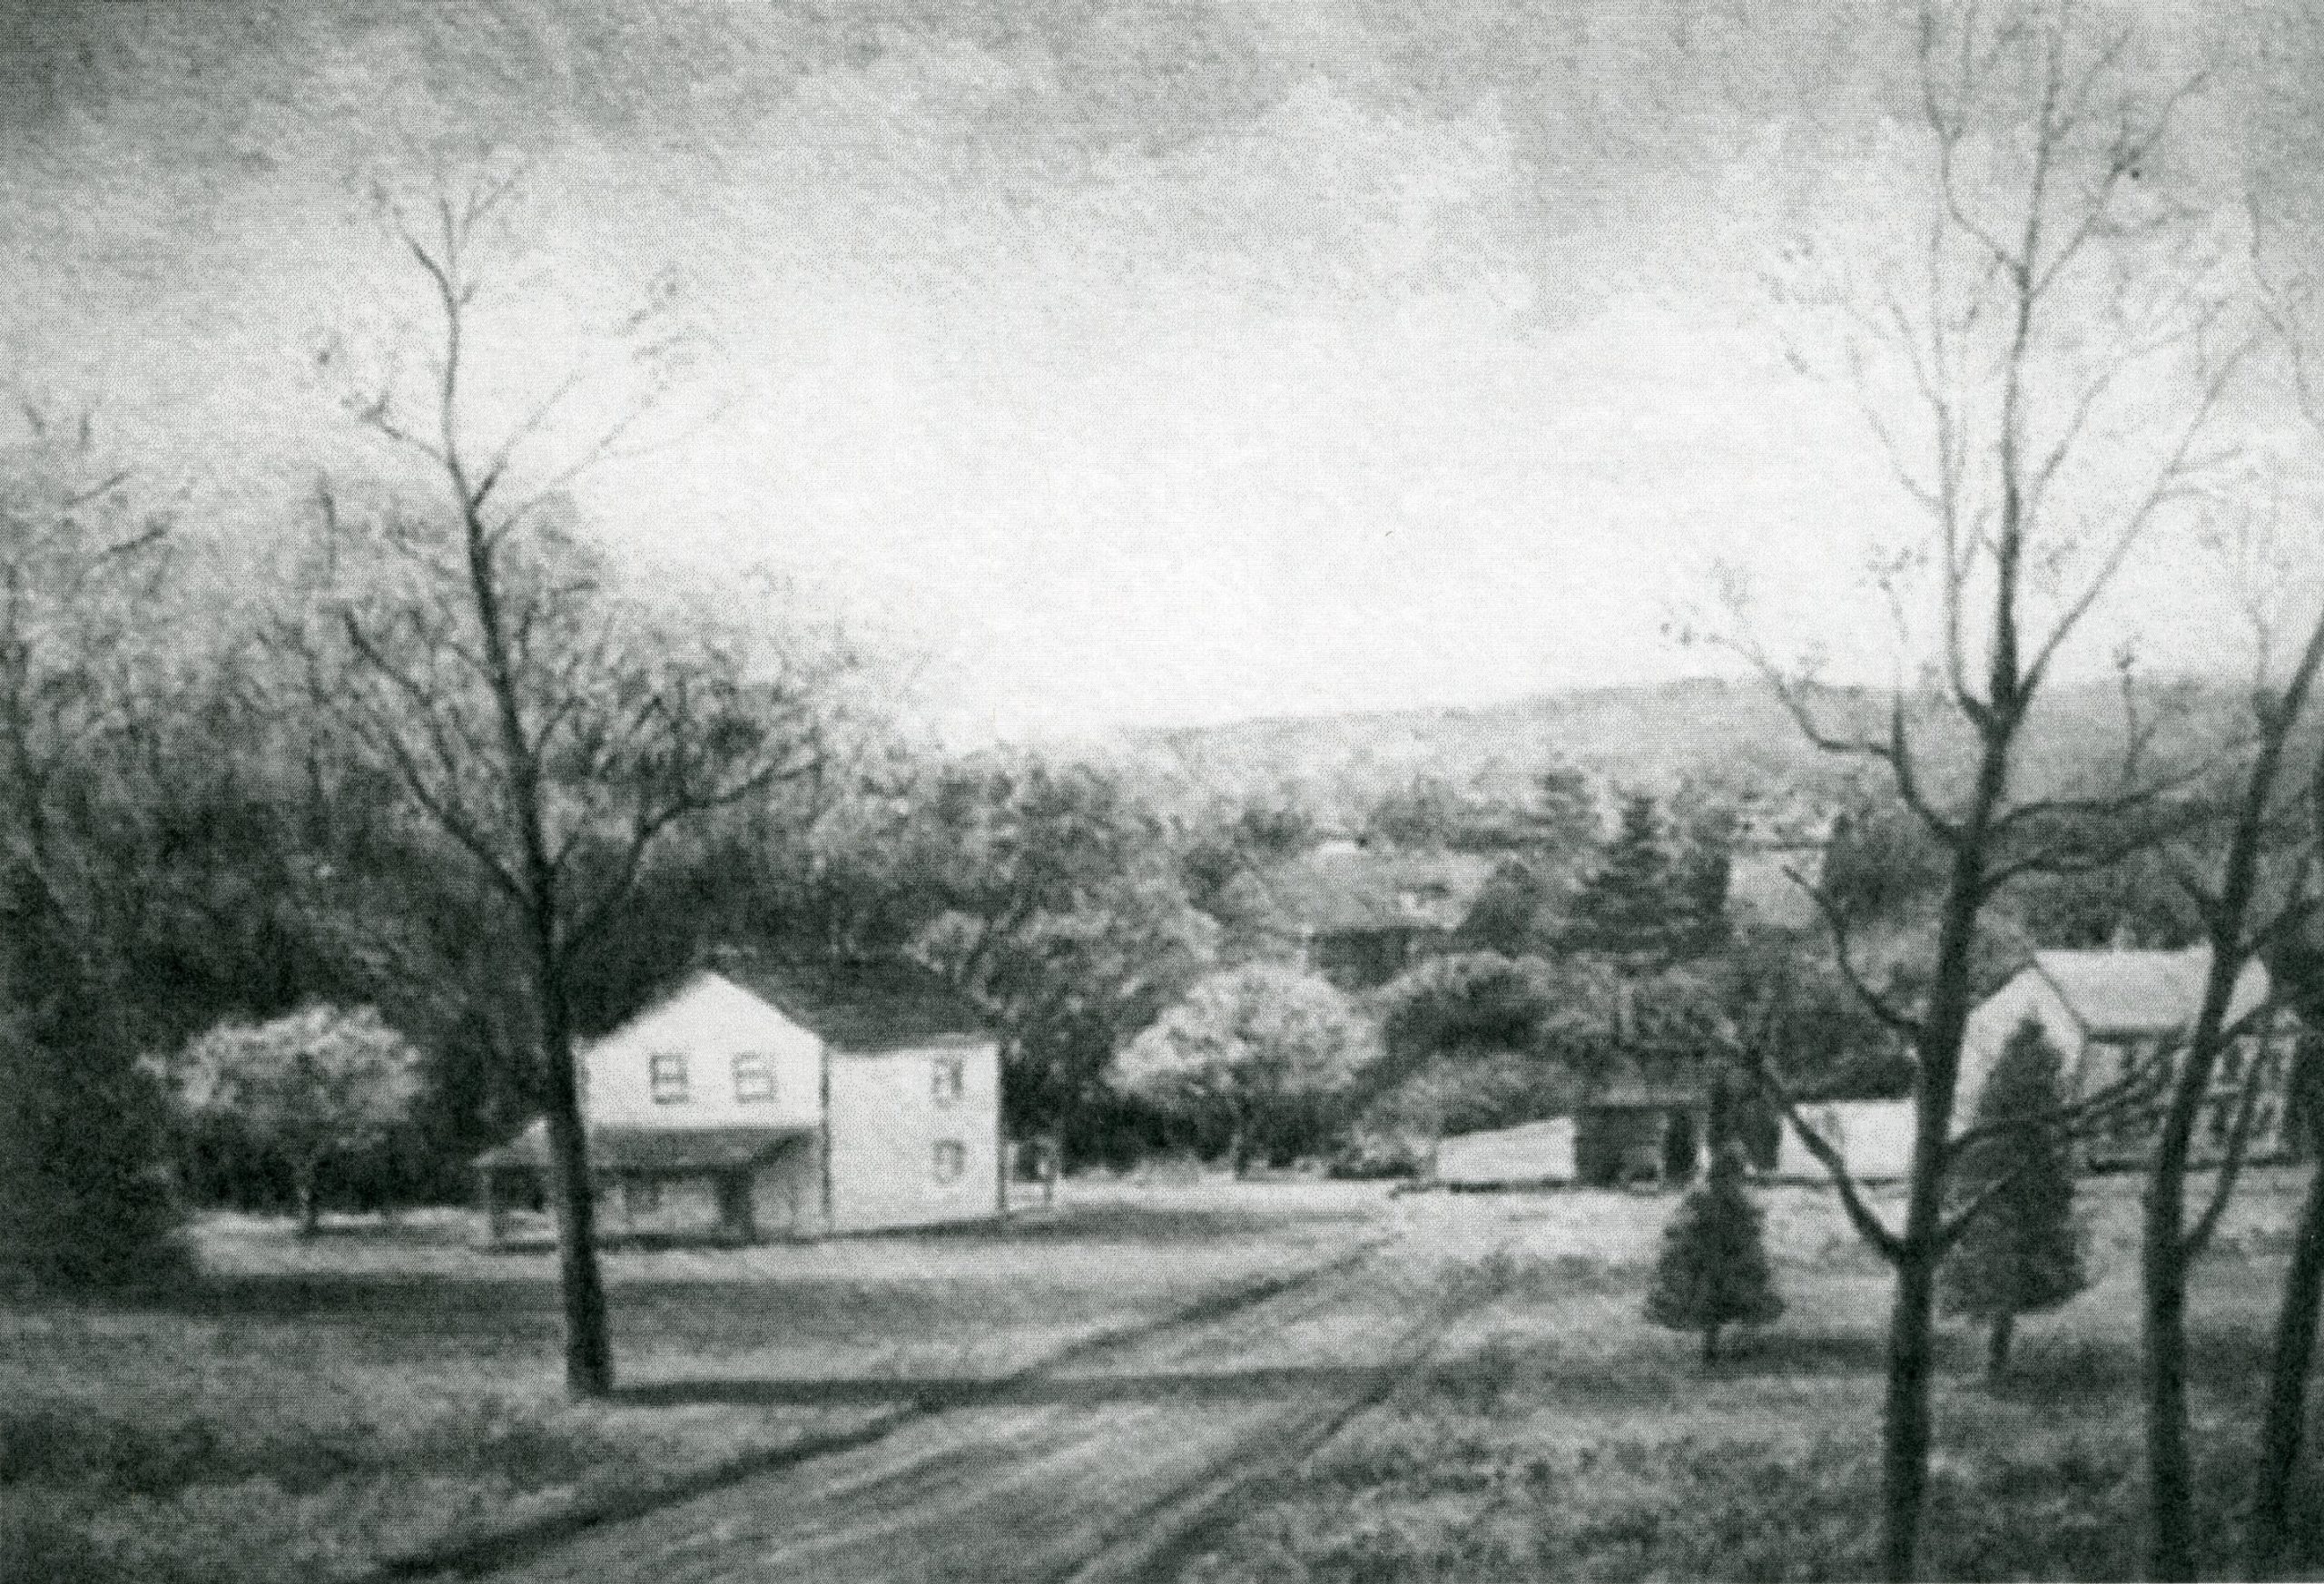 Drawing of Pelham Town in 1940s by W. Palmer